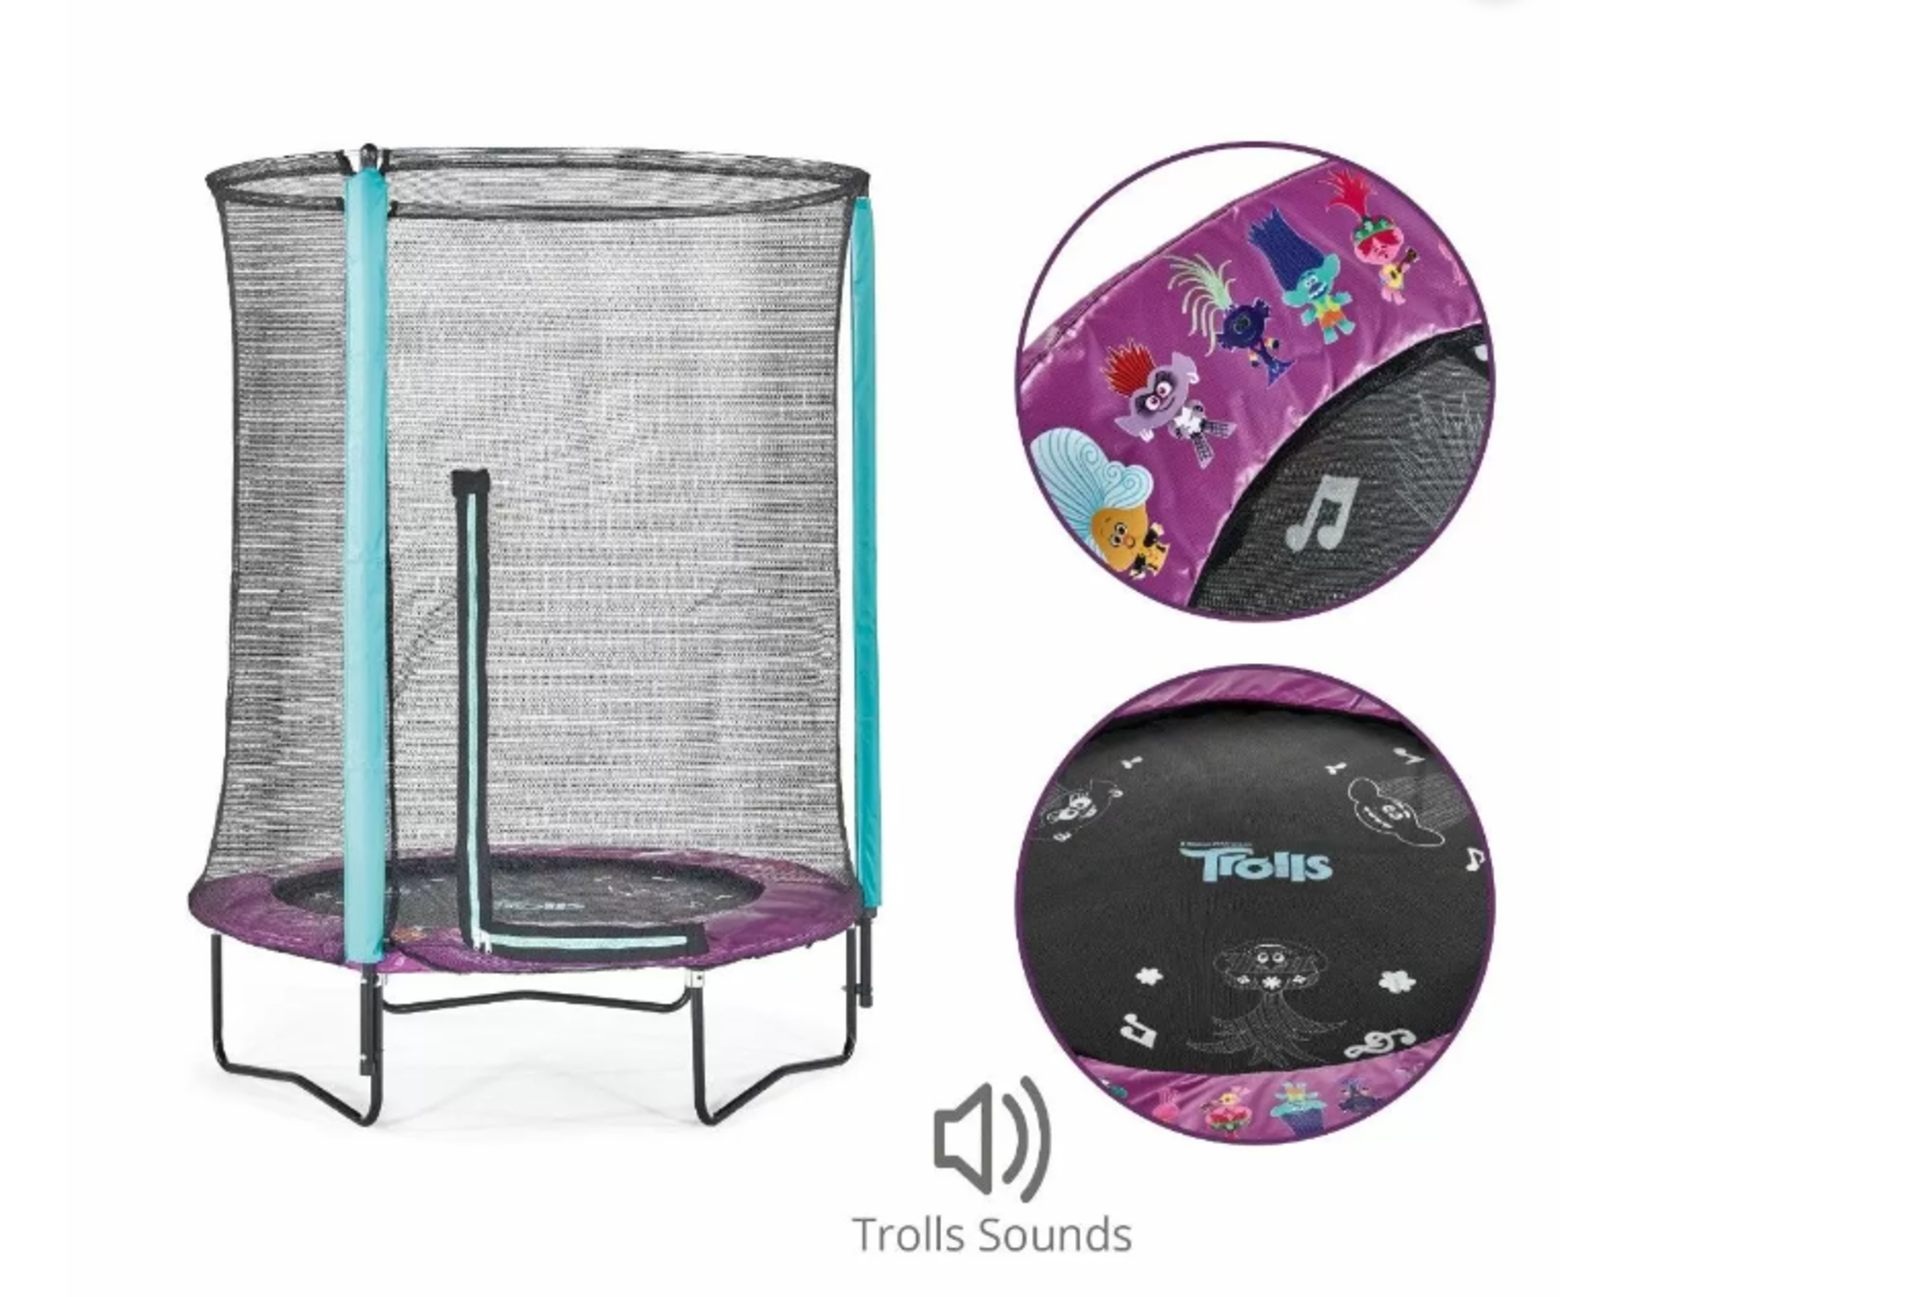 PLUM TROLLS 4.5FT JUNIOR TRAMPOLINE & ENCLOSURE. RRP £215.00. Little ones can go on a bouncing